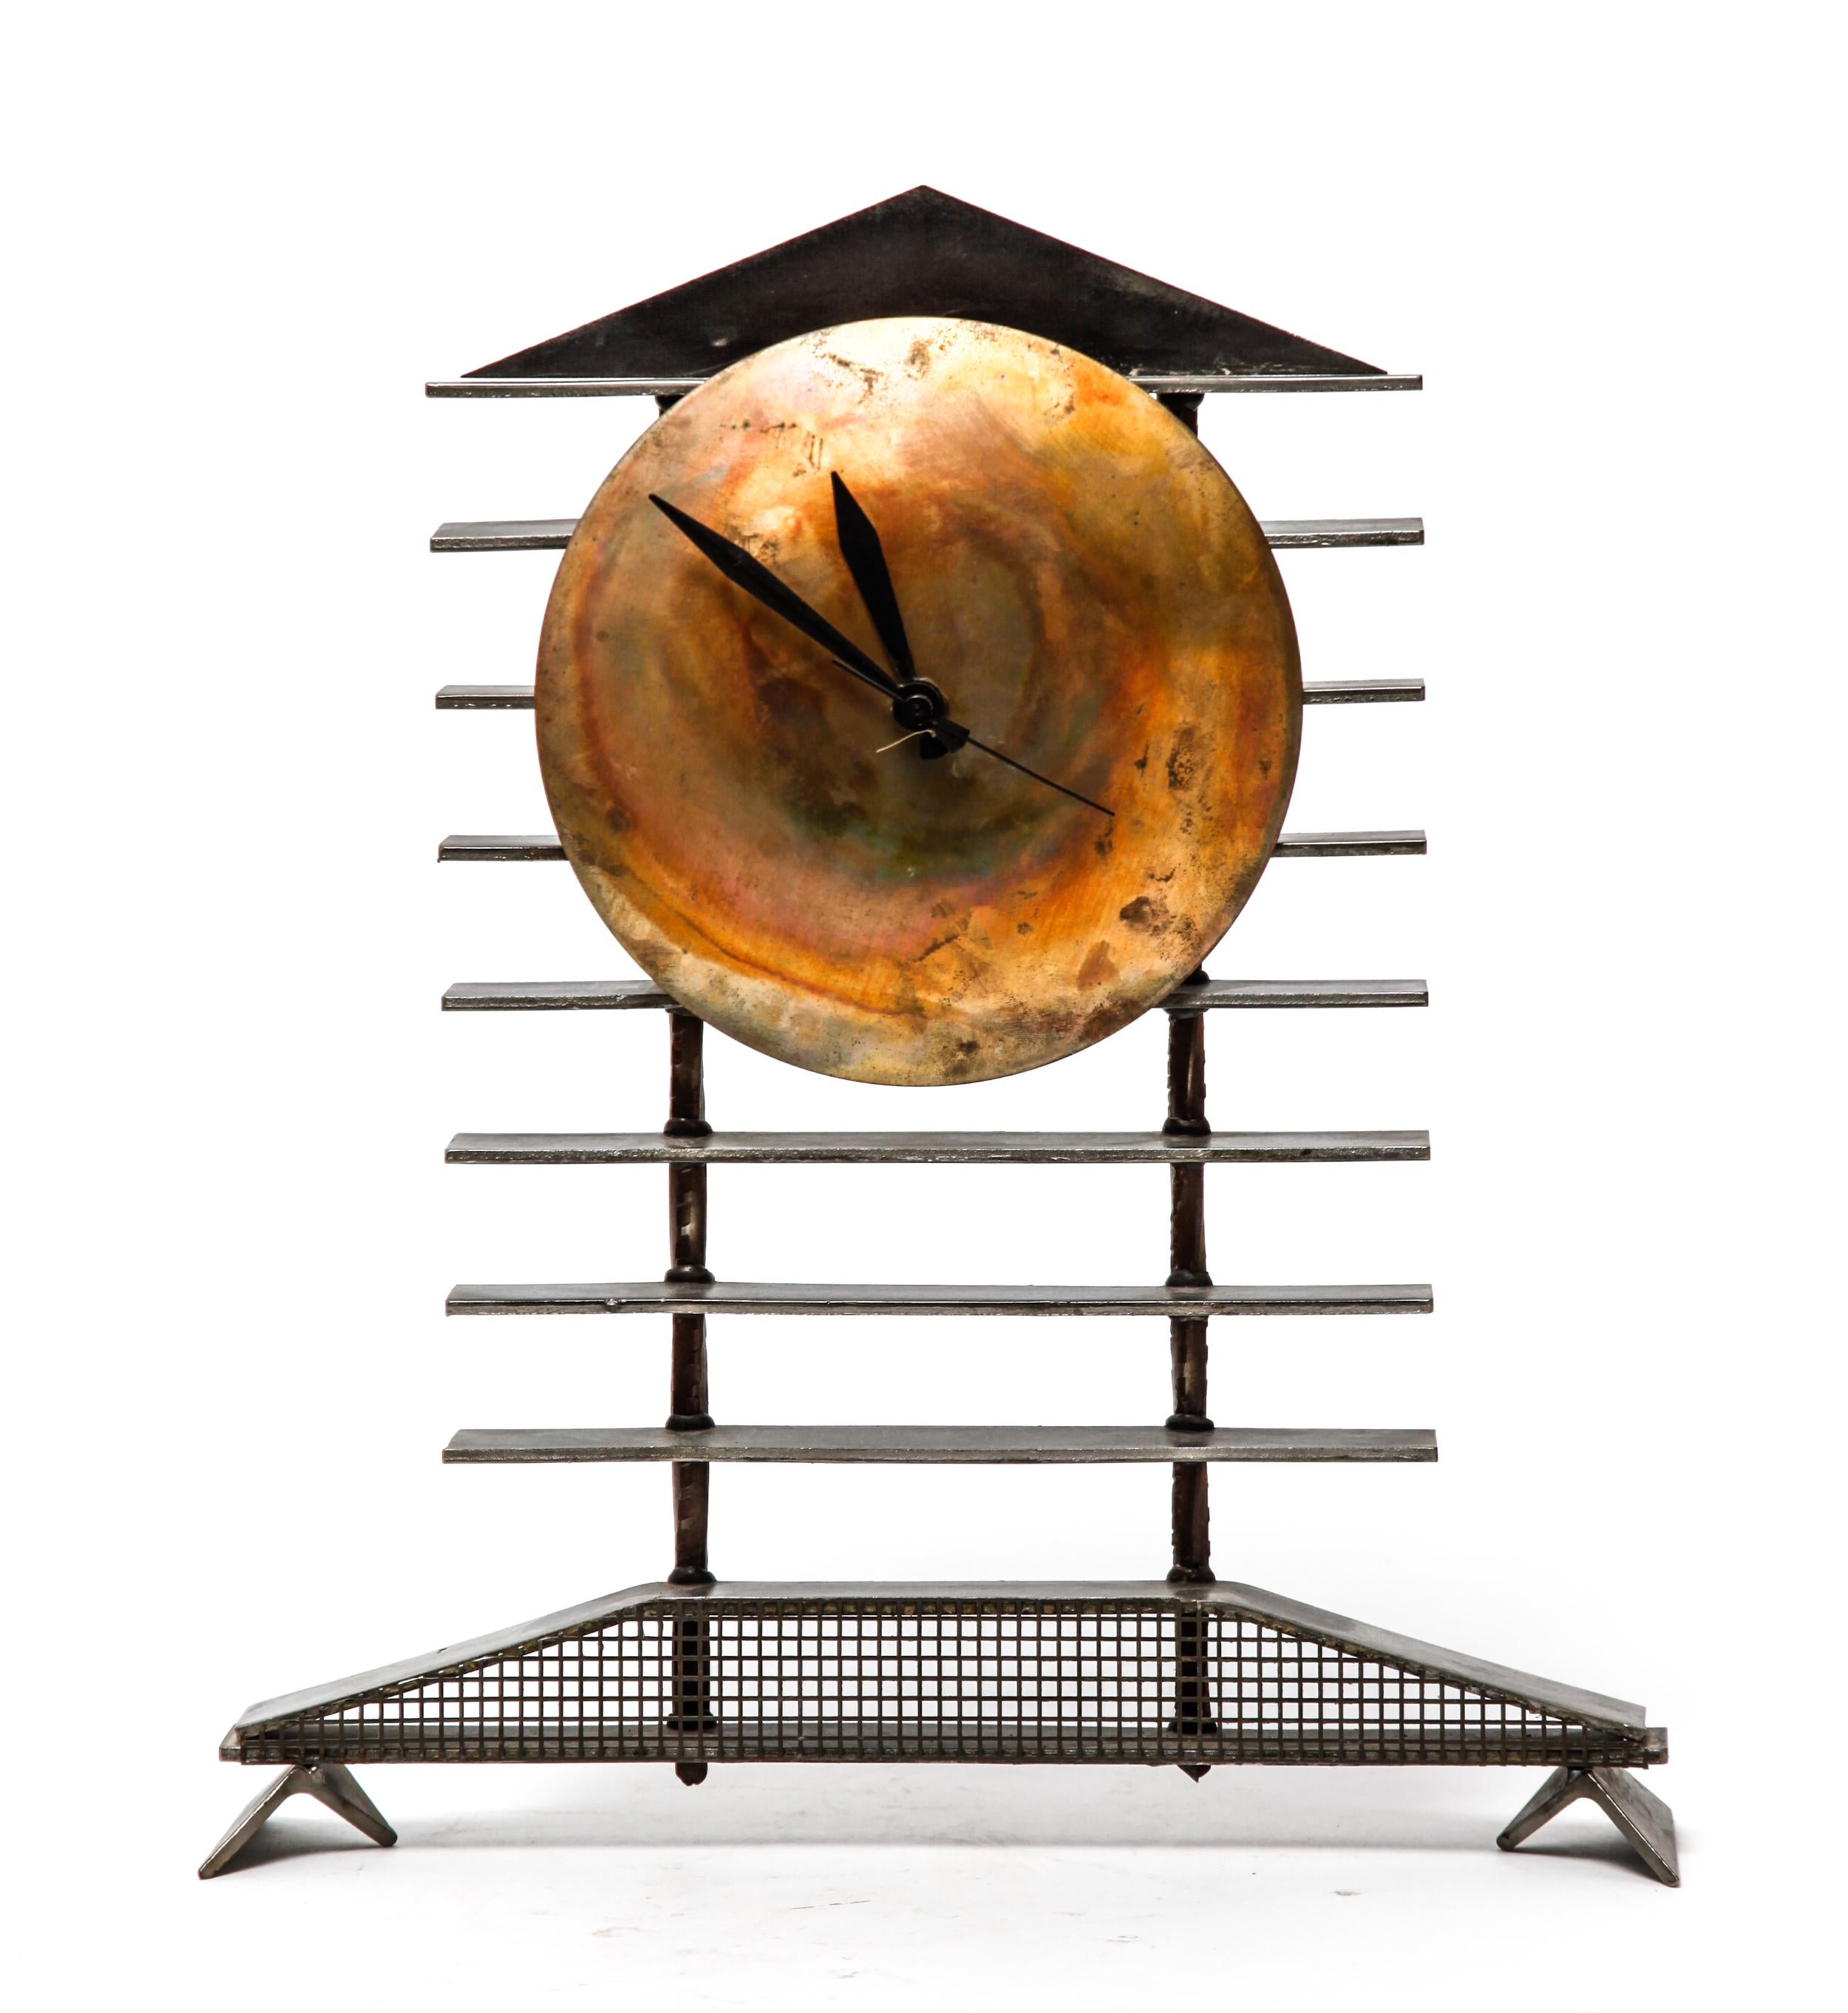 Post-modernist mantel clock made of steel and brass. The piece has a quartz battery movement in the back and is in great vintage condition, with some minor age-related wear to the metal surfaces.